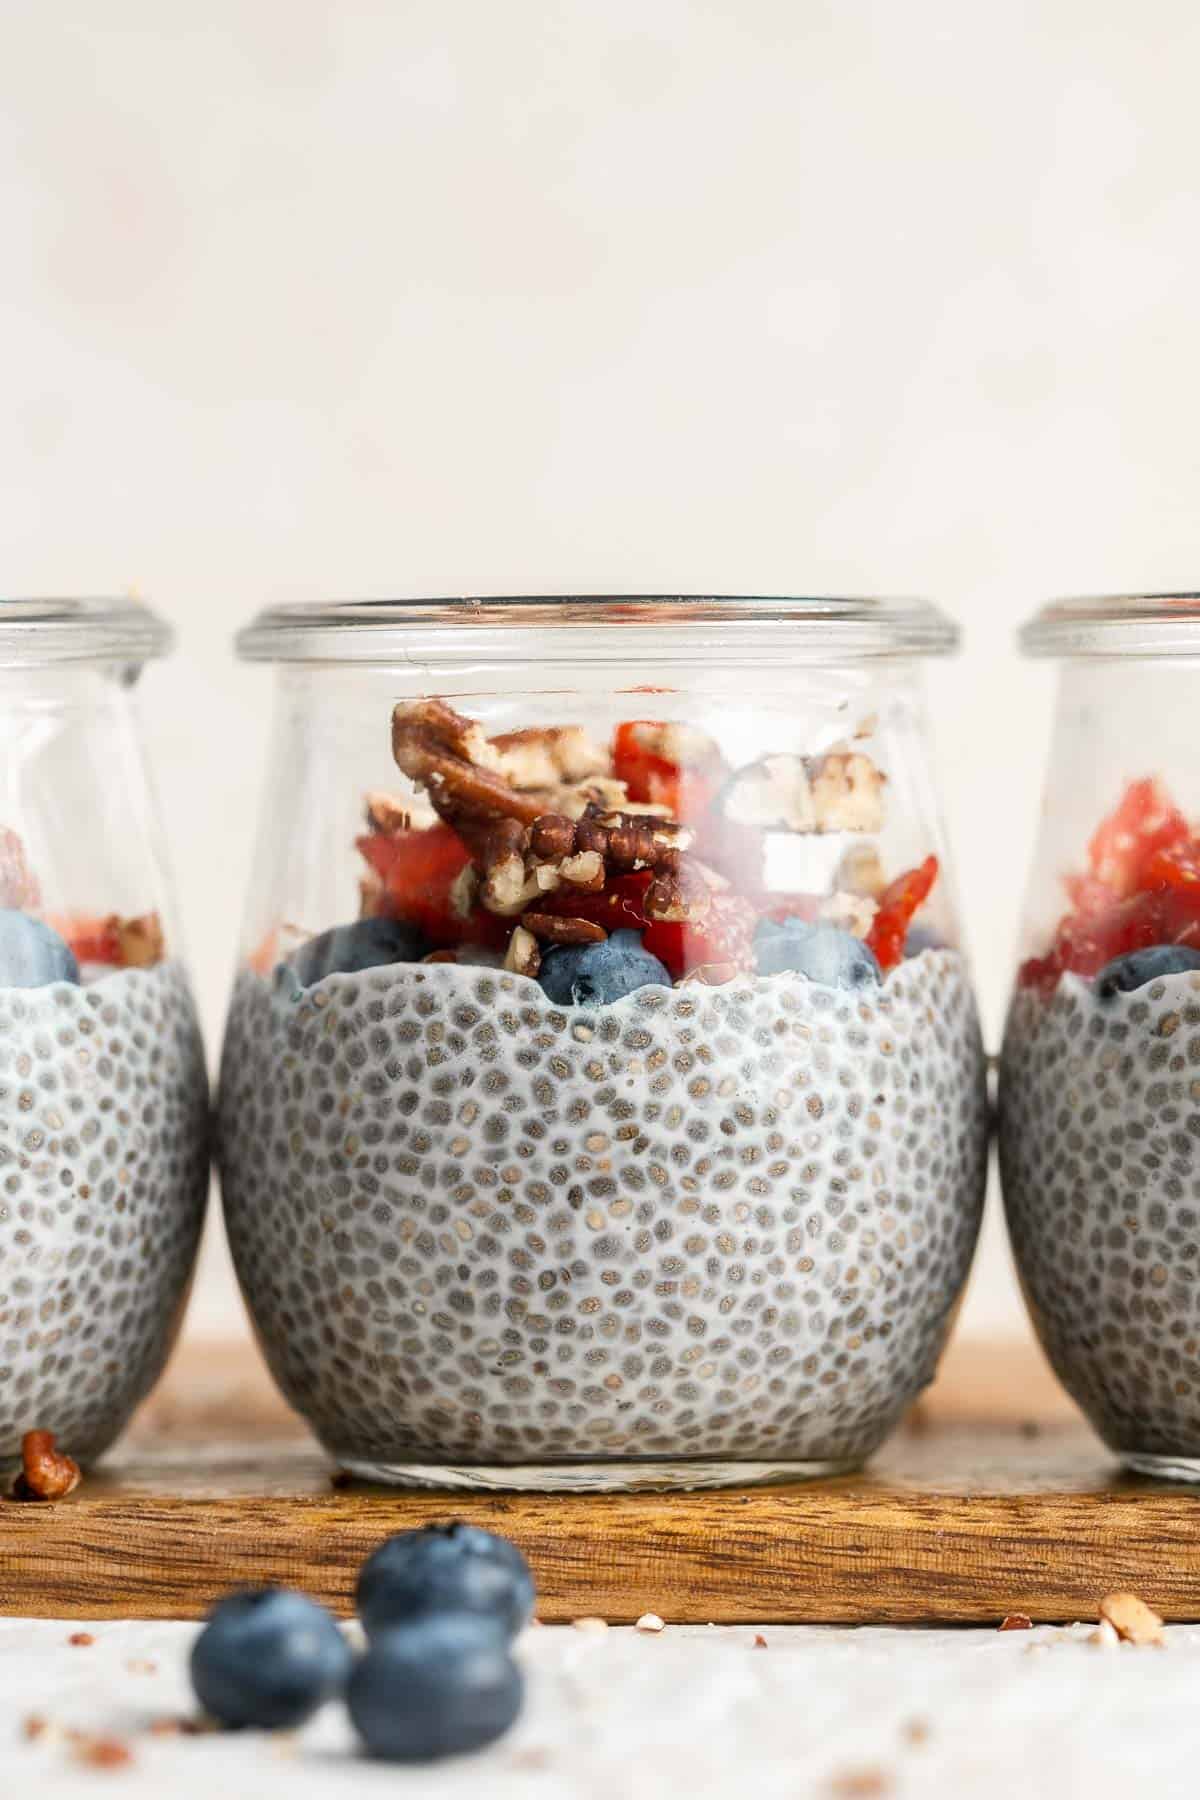 https://www.aheadofthyme.com/wp-content/uploads/2018/05/chia-seed-pudding-4.jpg